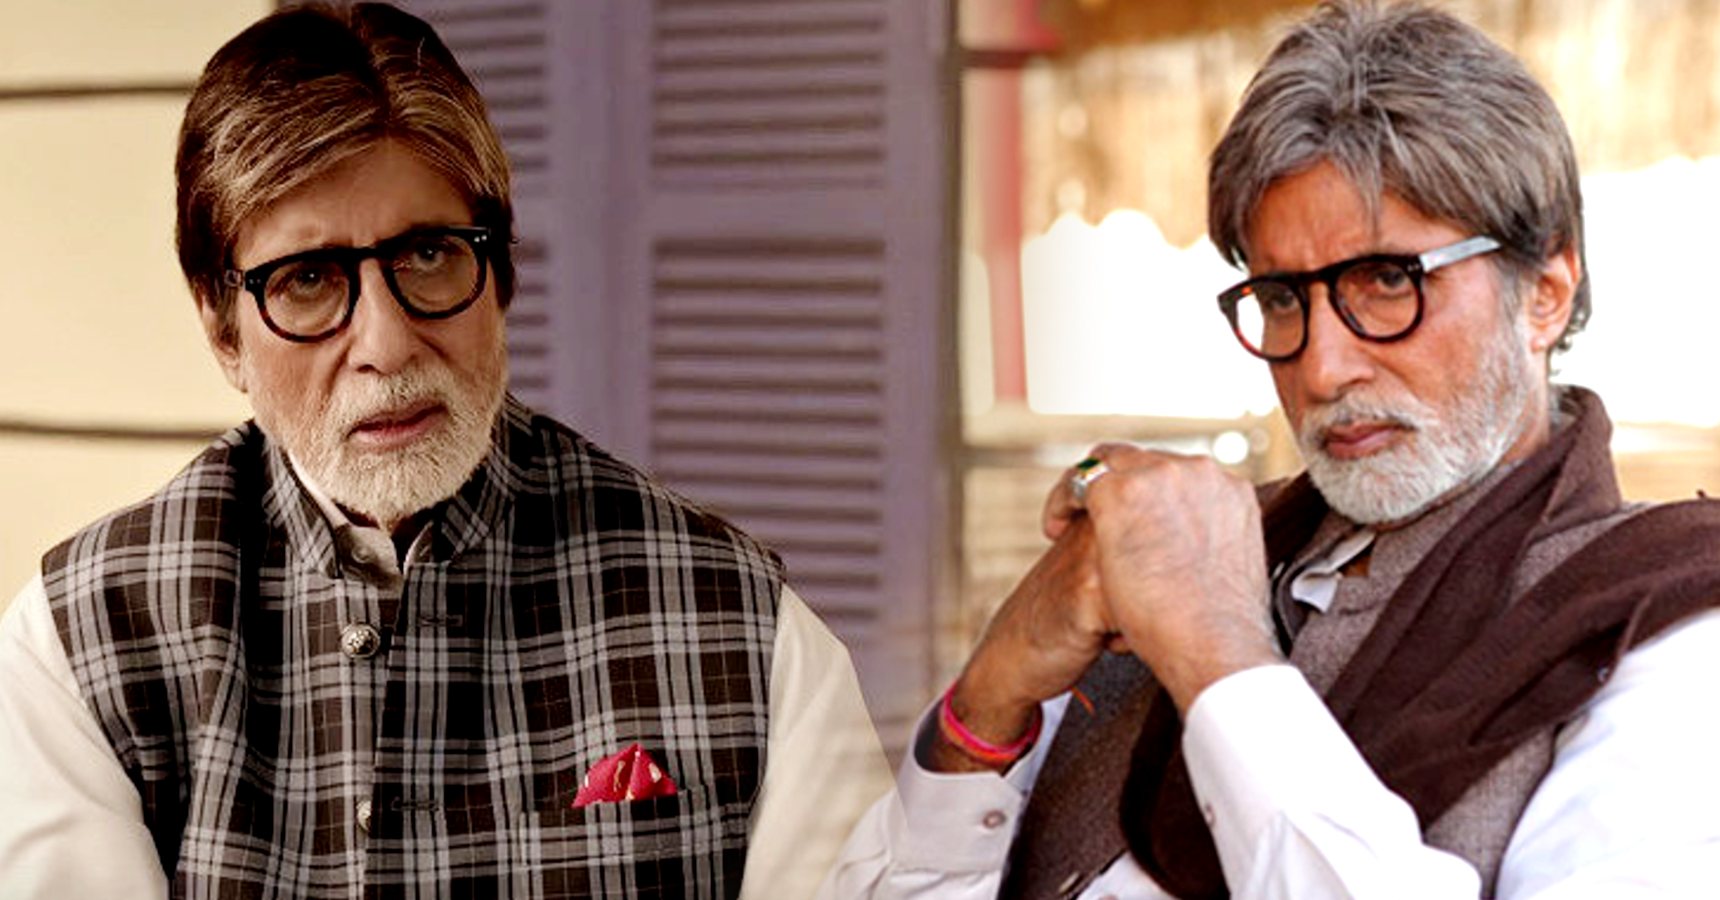 Amitabh Bachchan got injured during Project K shooting in Hyderabad